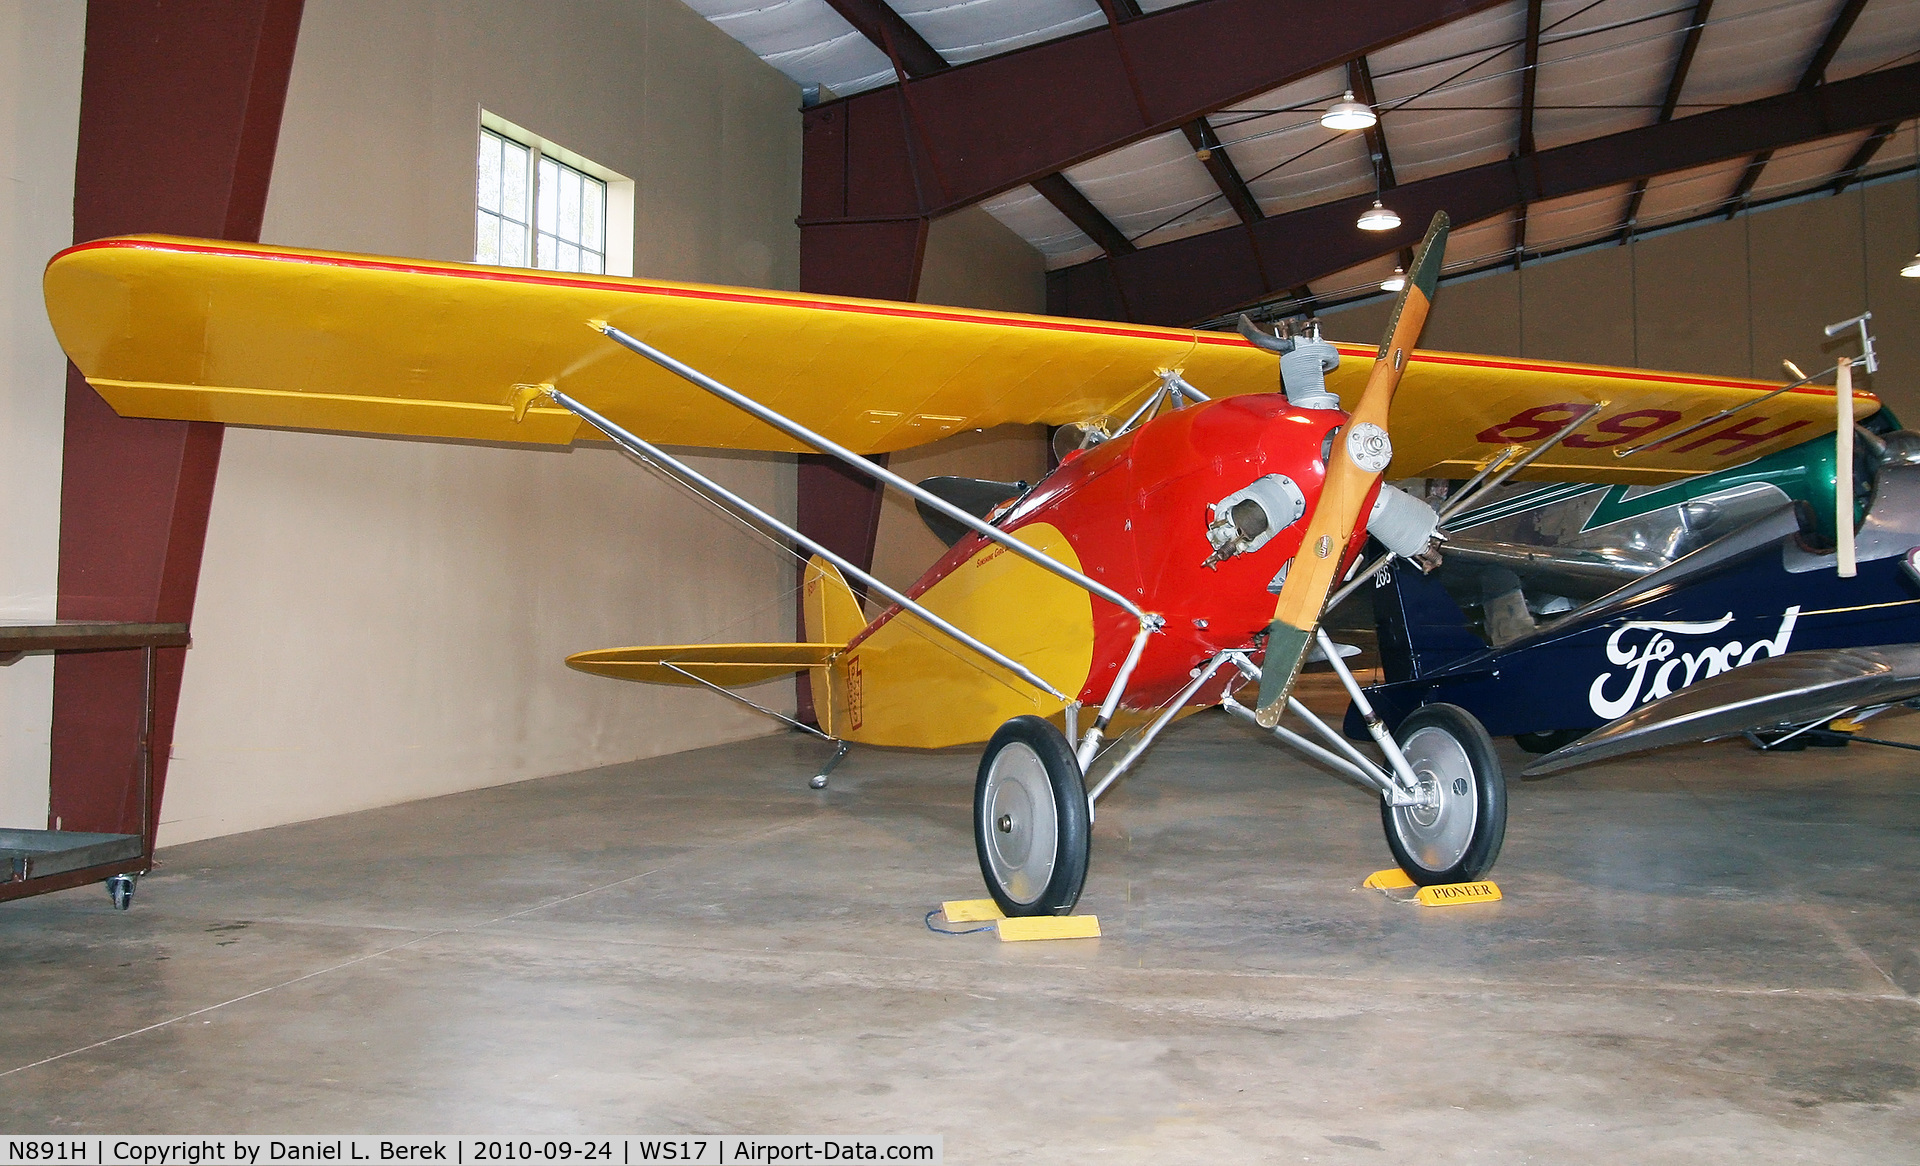 N891H, 1930 Driggers 1-A C/N 1, This aircraft was the third classic Golden Age parasol monoplane design of Willard Driggers.